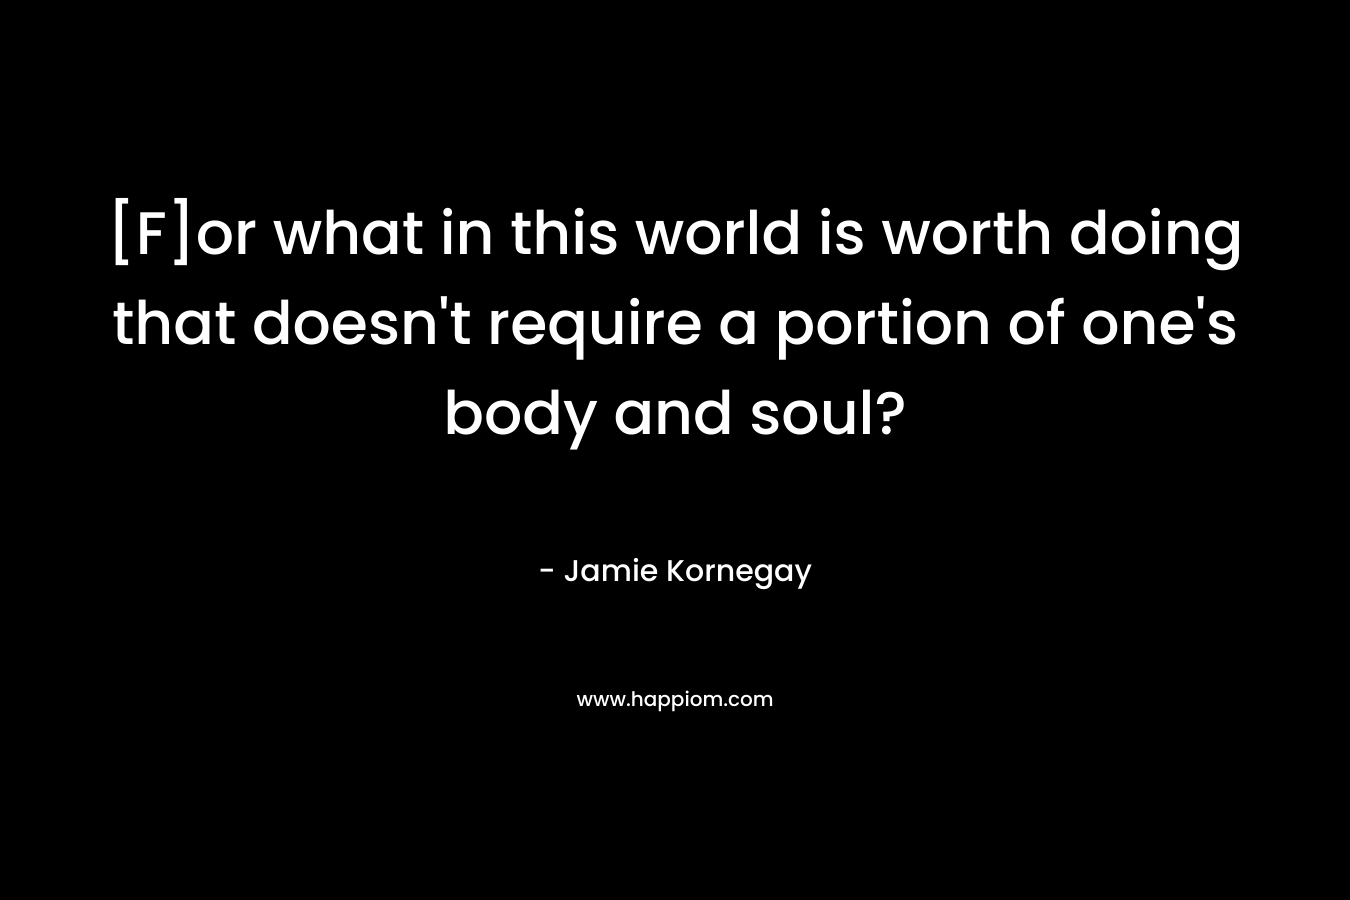 [F]or what in this world is worth doing that doesn’t require a portion of one’s body and soul? – Jamie Kornegay